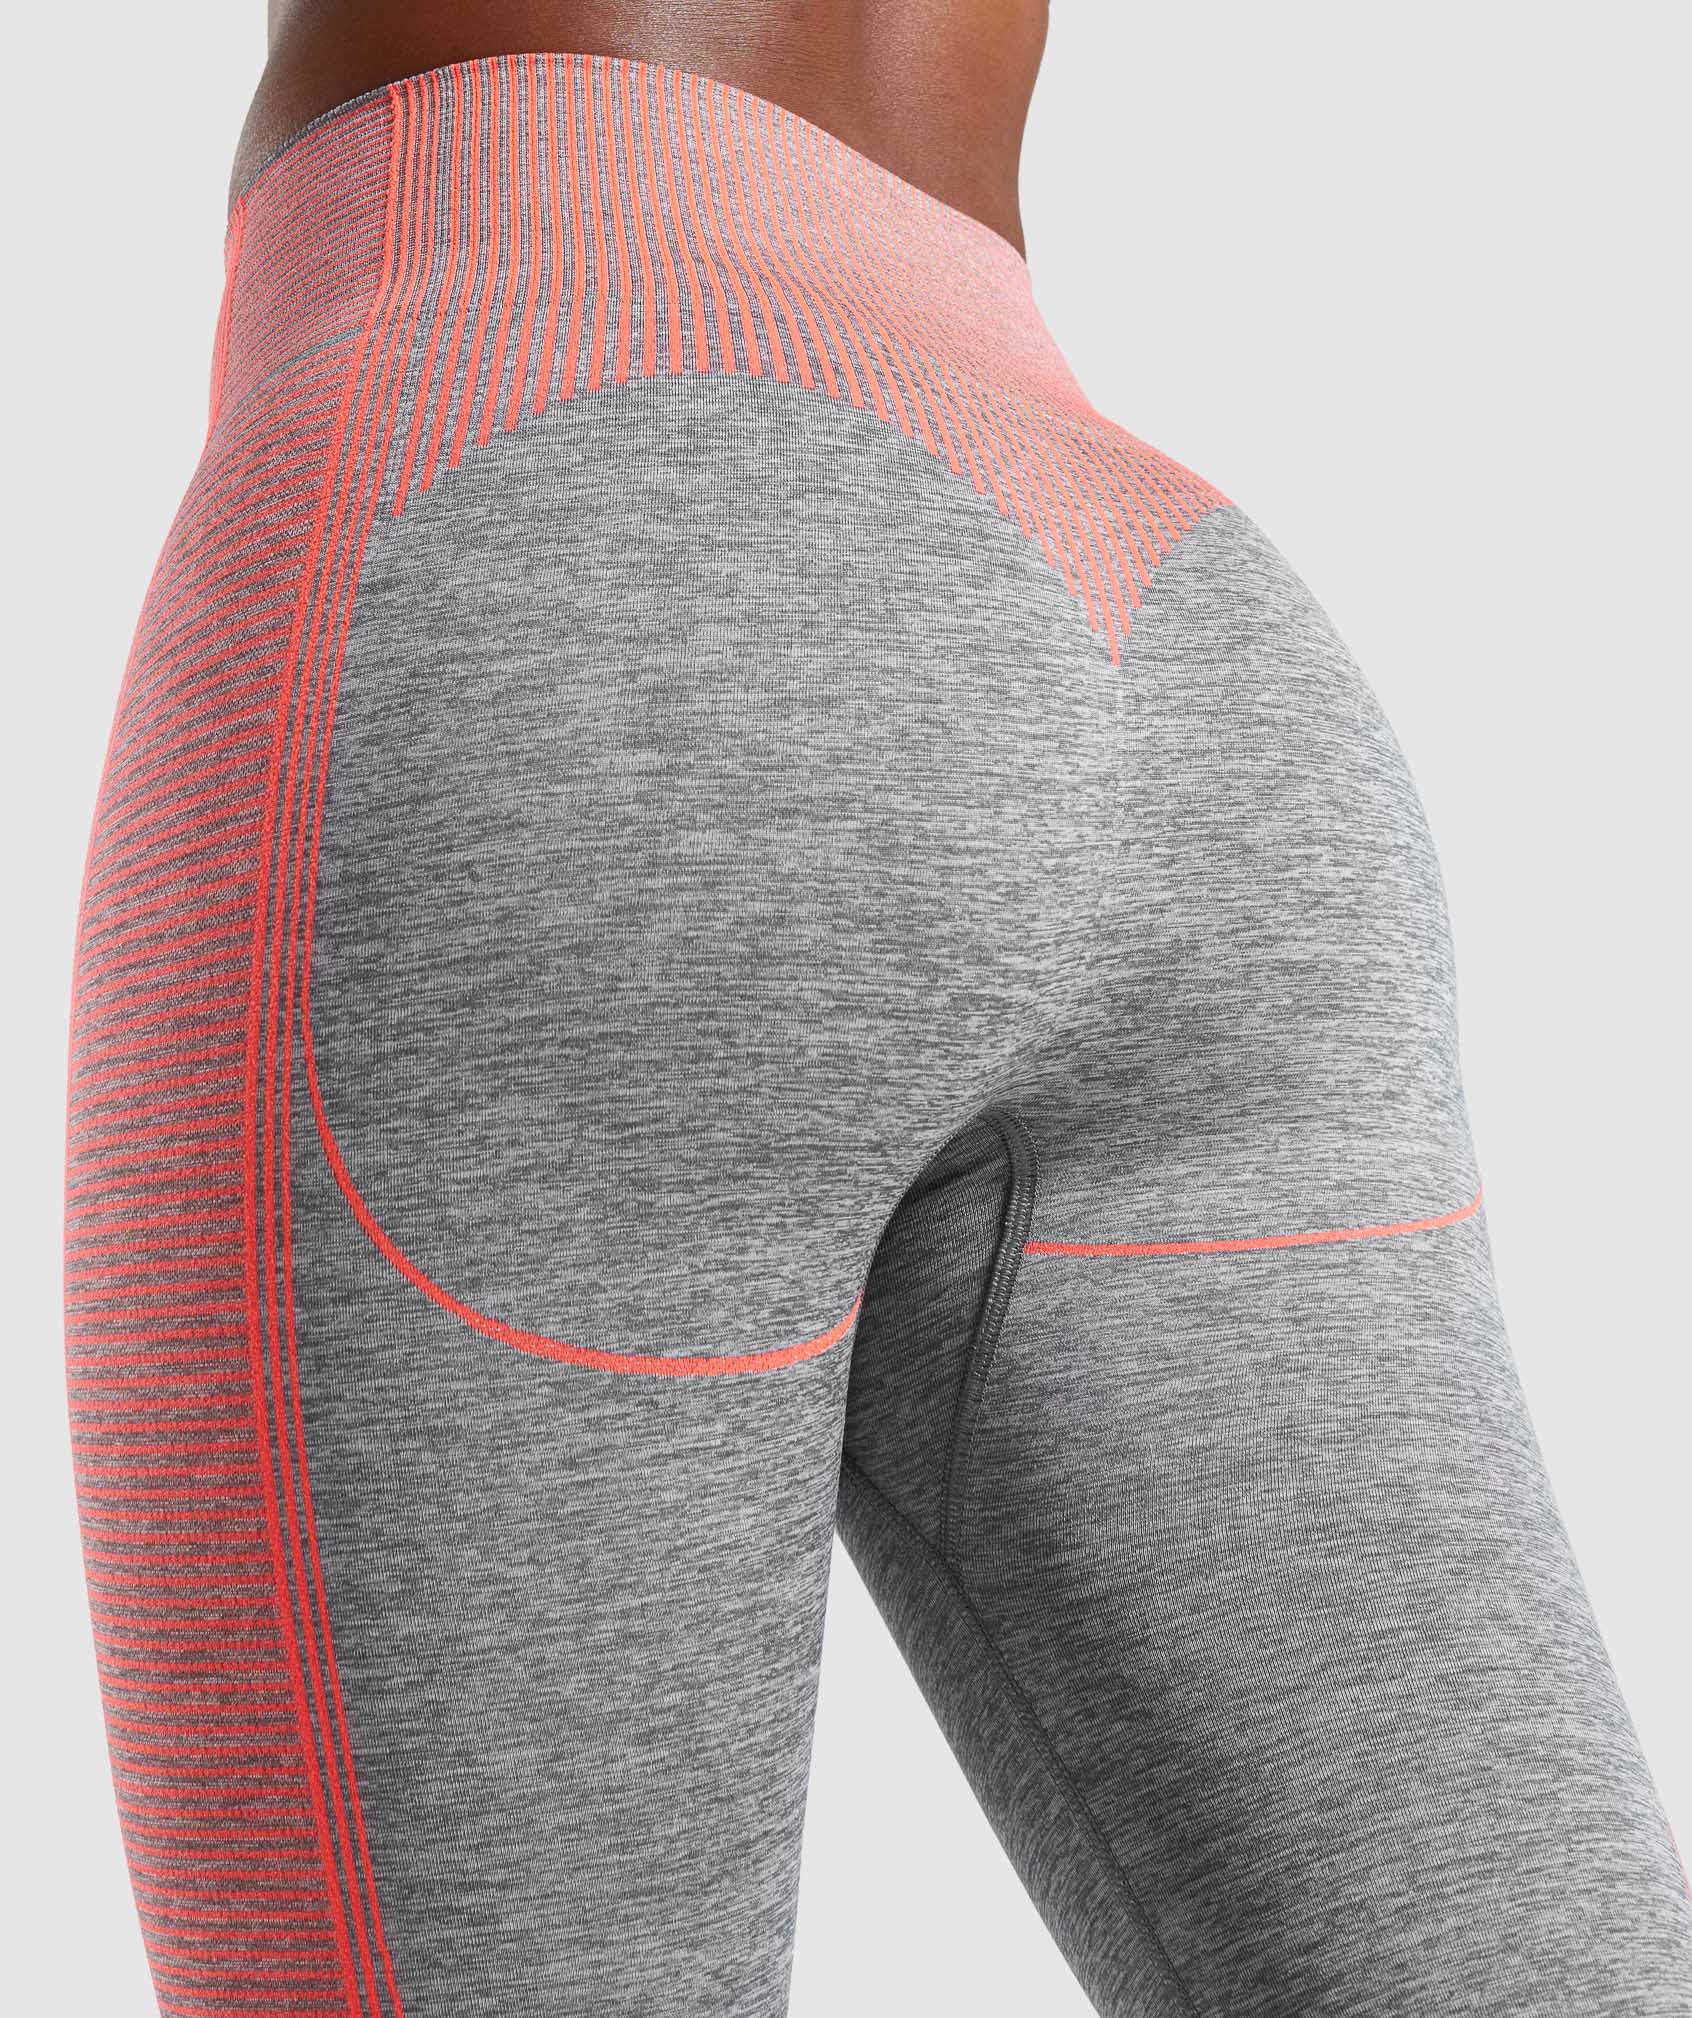 Hyper Amplify Leggings in Charcoal Marl/Coral - view 7